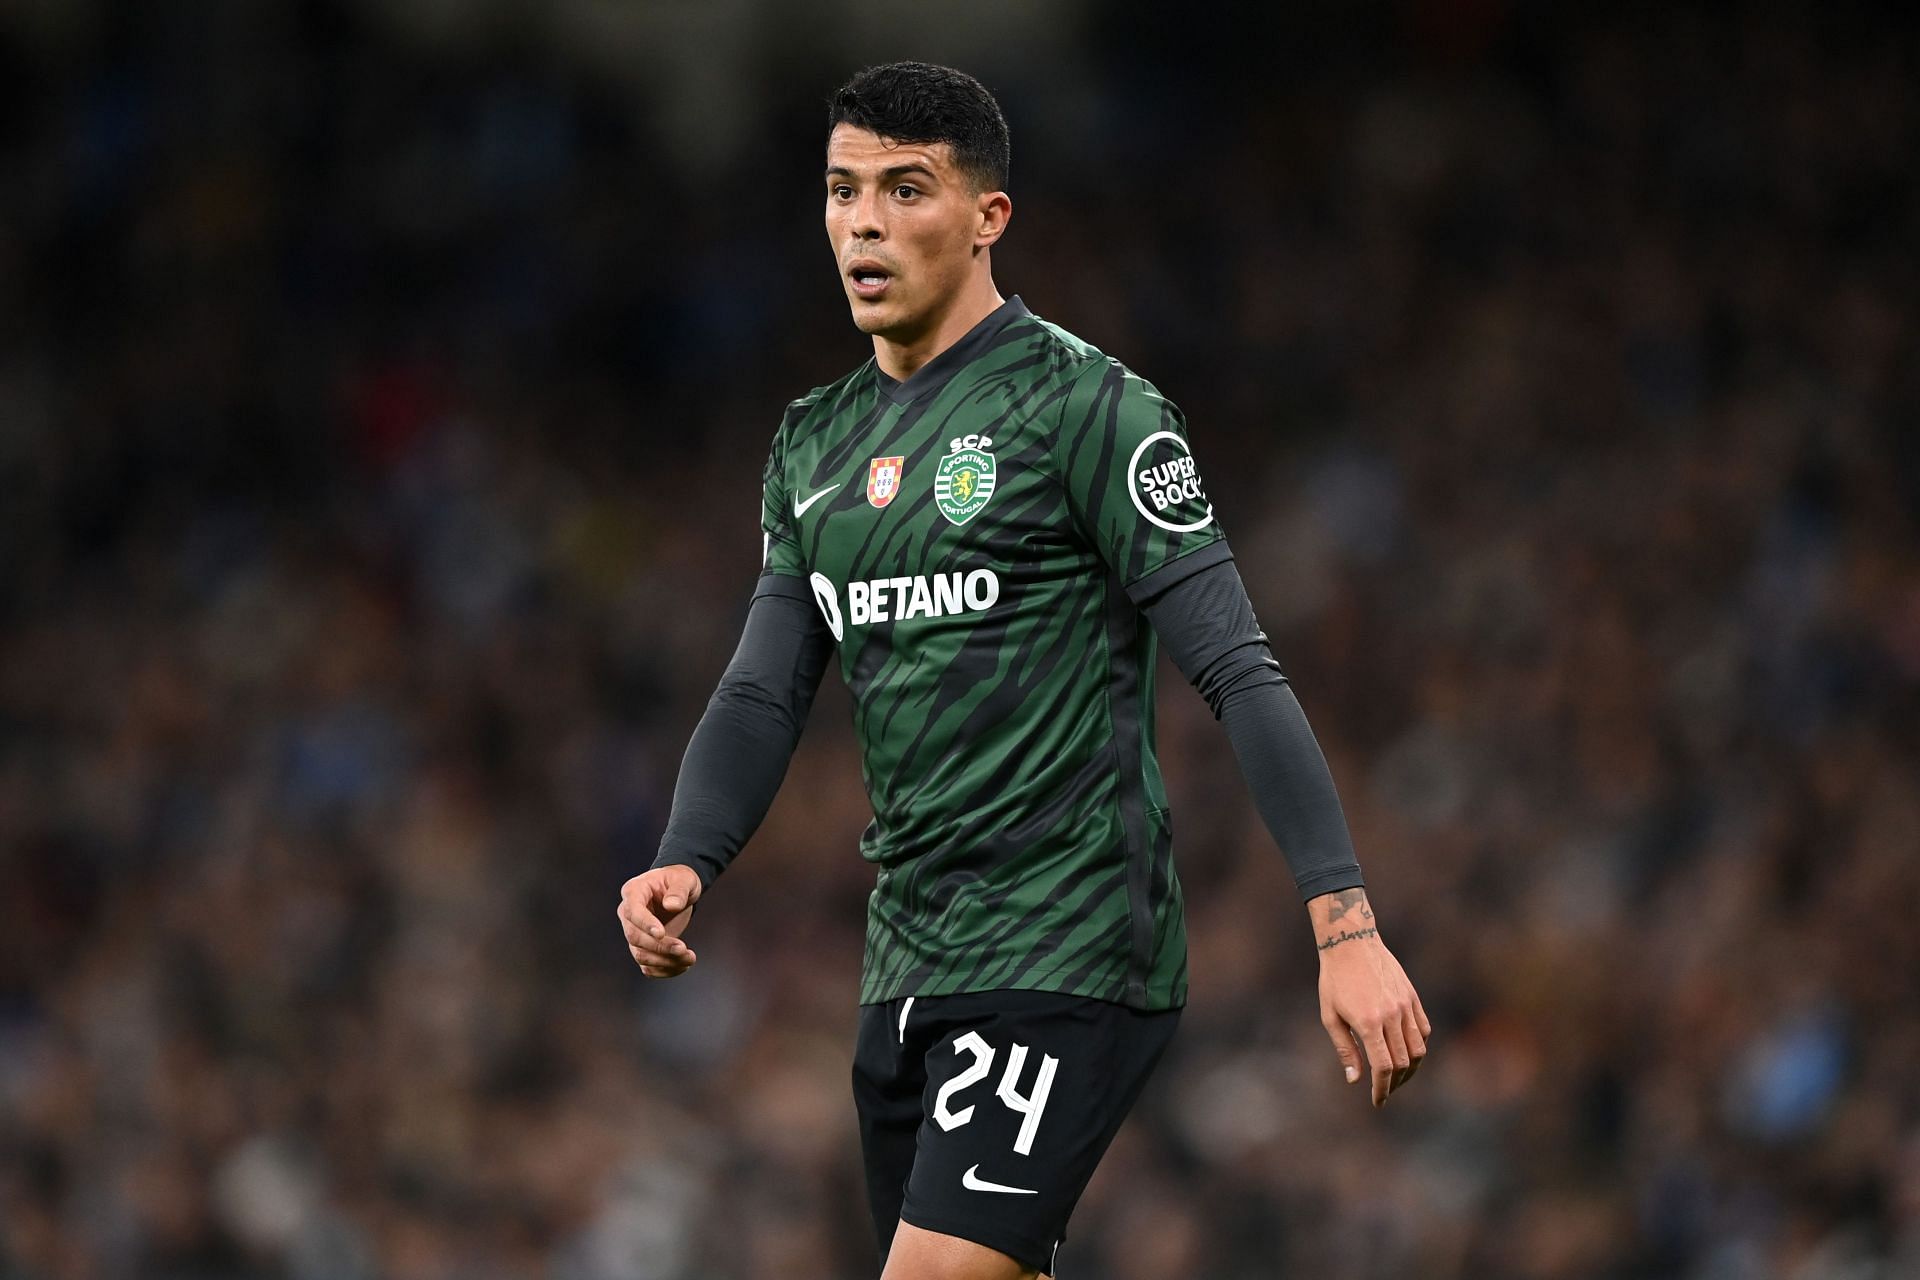 The Cityzens might not sell Pedro Porro this summer, considering his impressive performances for Sporting CP